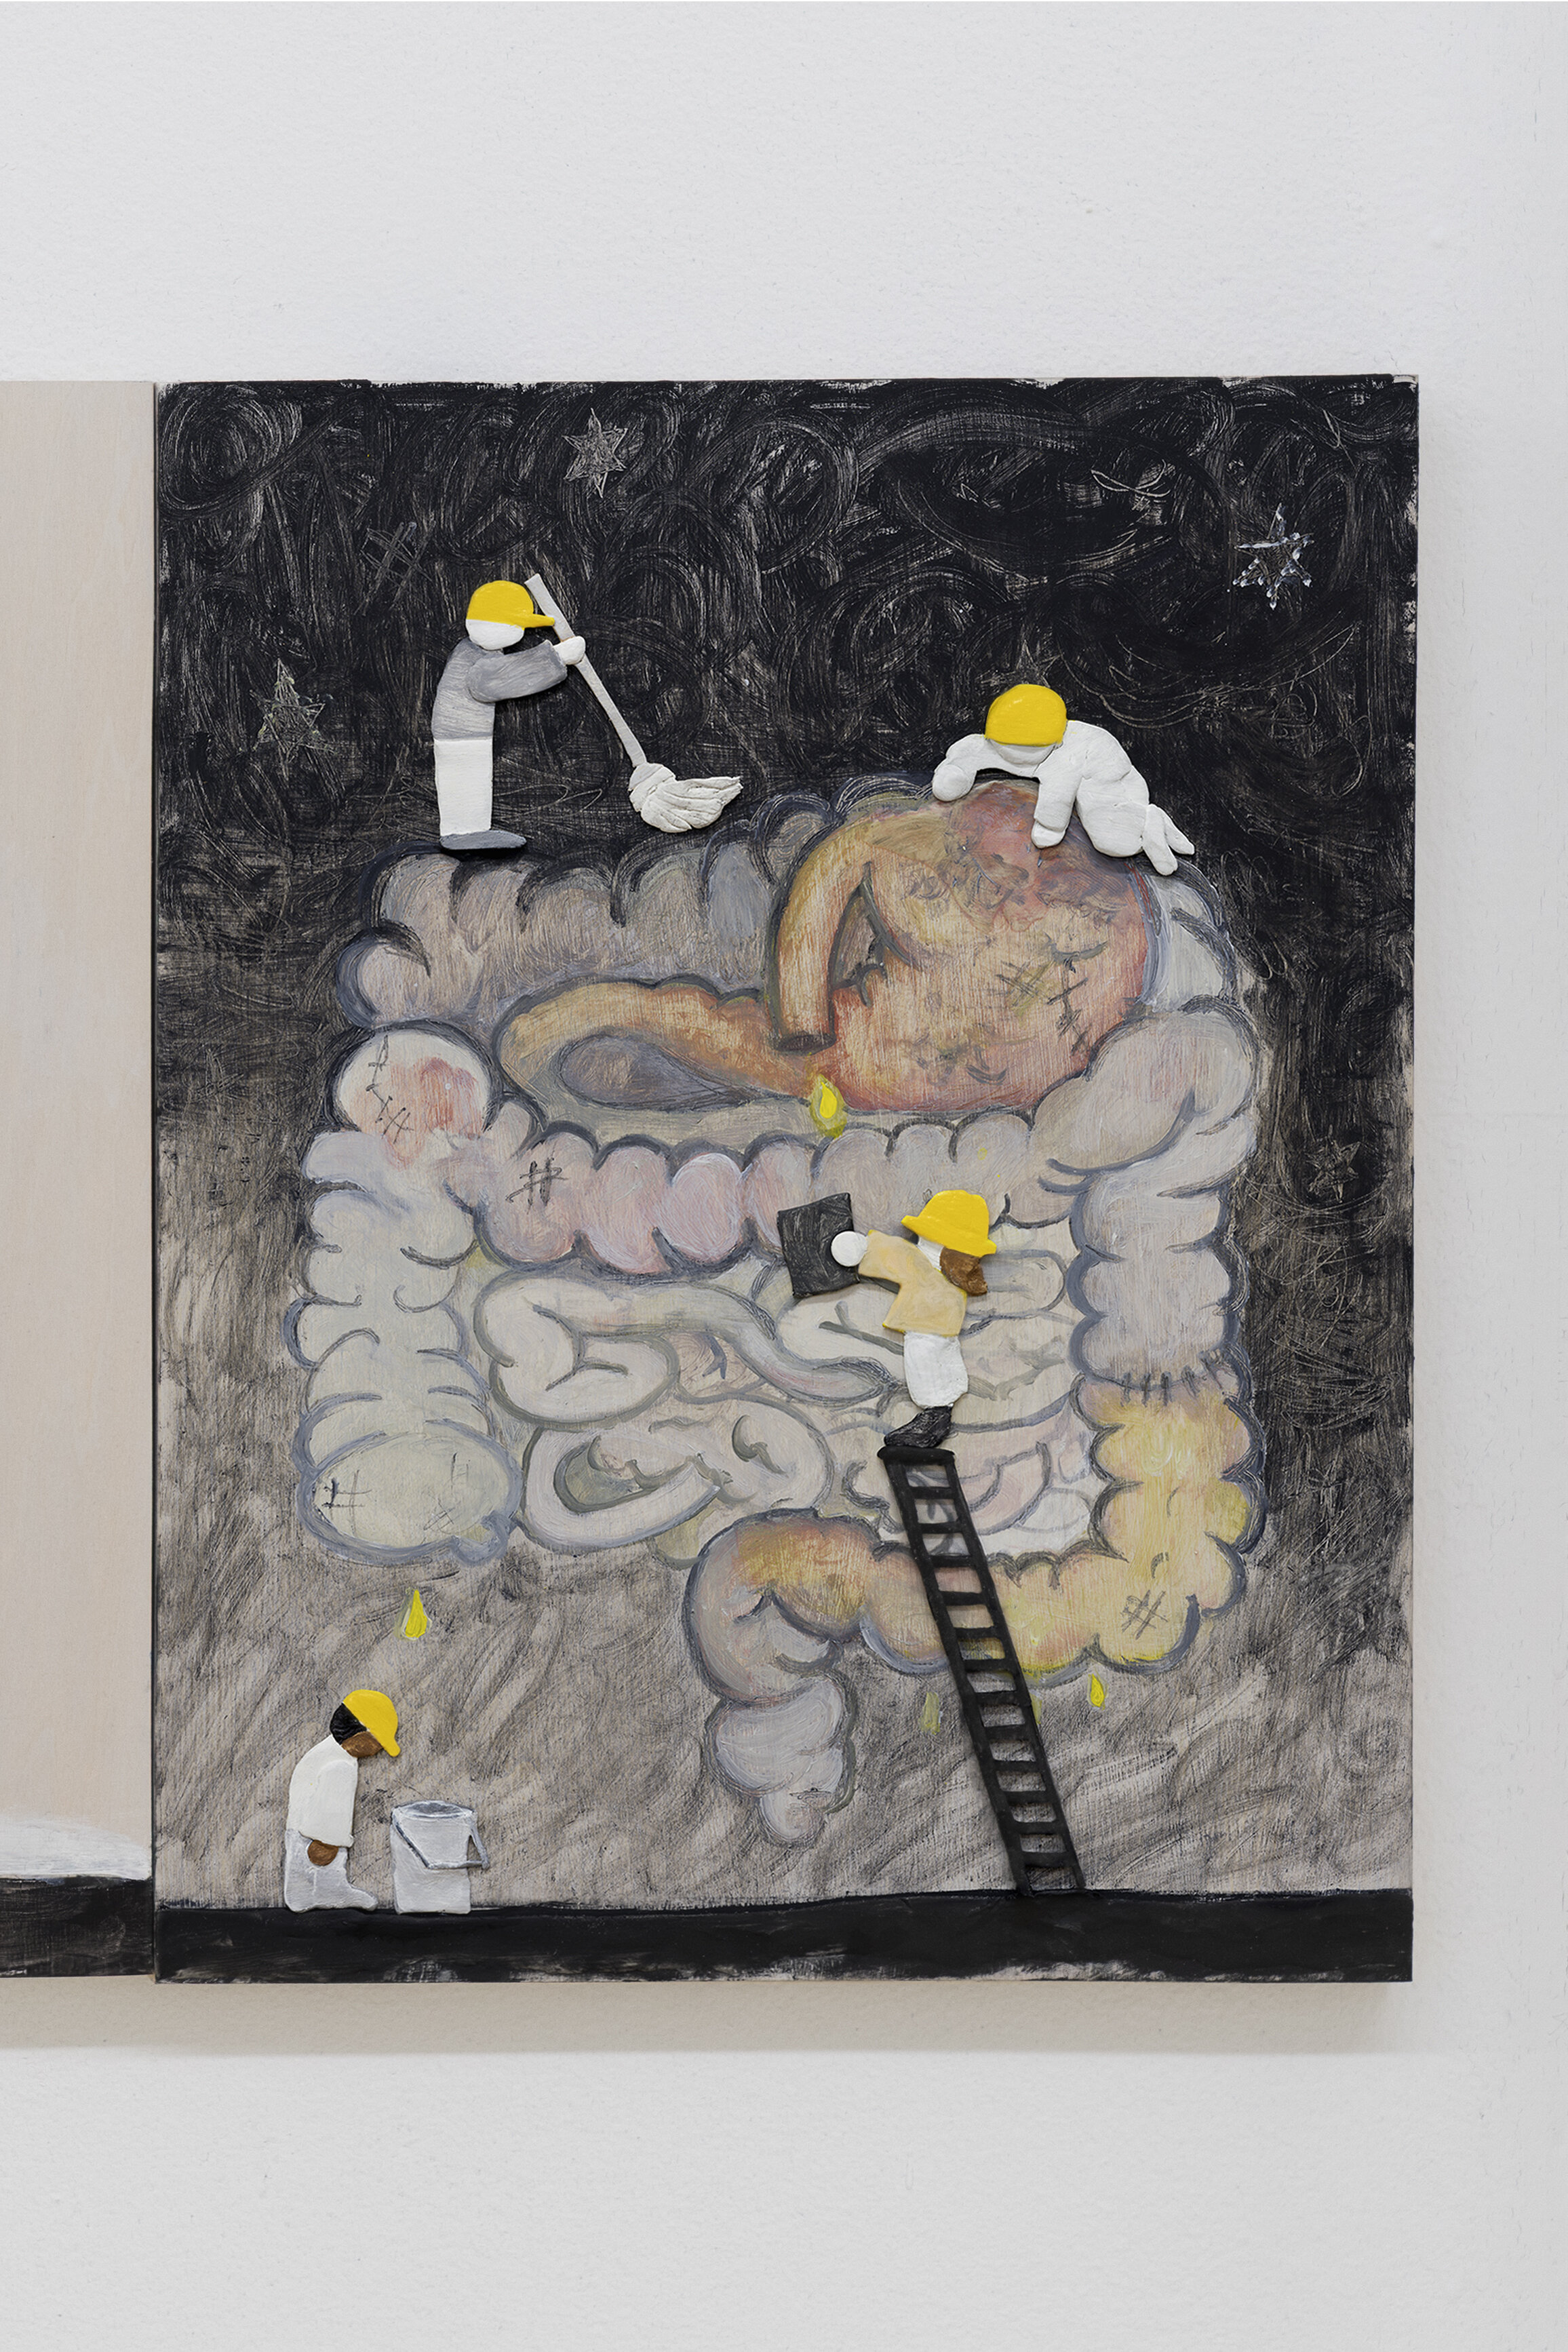  Dennis Witkin  Repairing Intestines,  2020 Oil paint, acrylic paint, cal-tint, wood-stain, charcoal, graphite, epoxy clay, polymer clay on panel 14 x 11 inches 